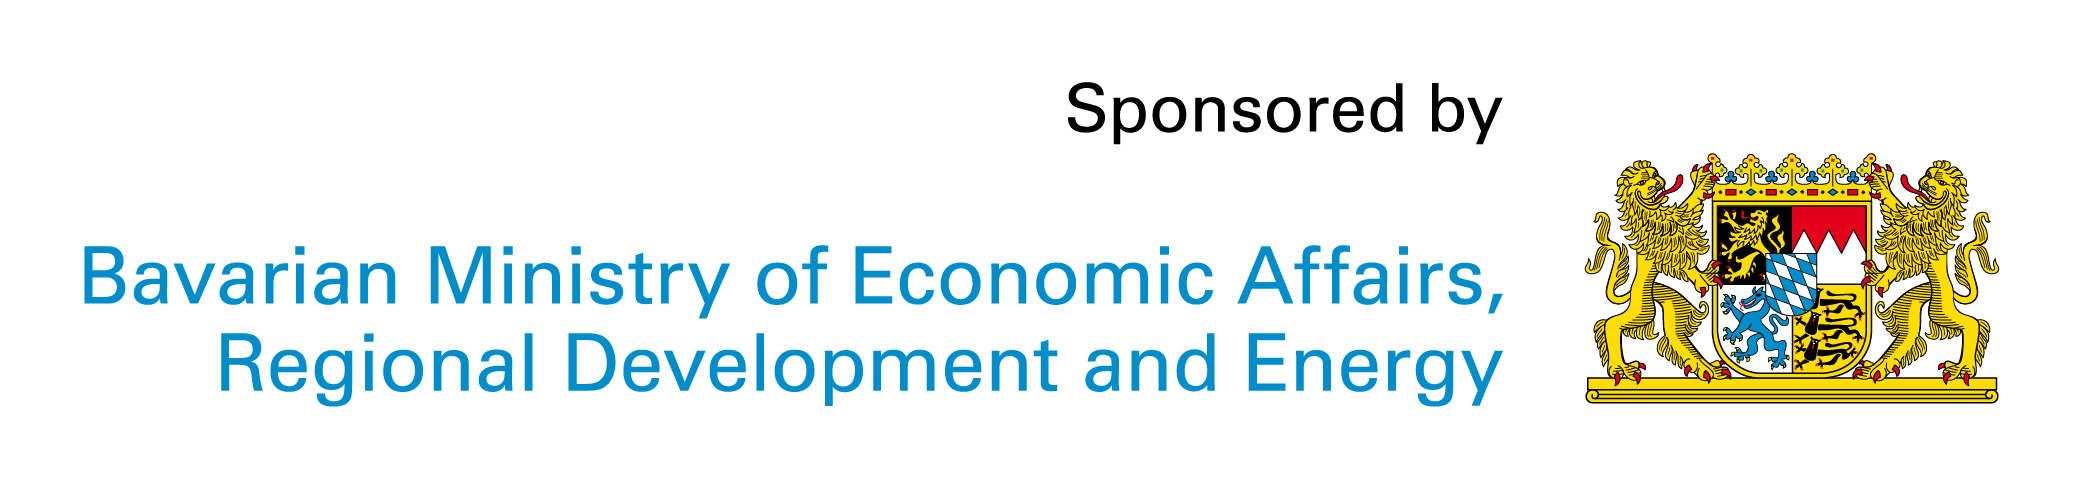 Sponsored by the Bavarian Ministry of Economic Affairs, Regional Development and Energy